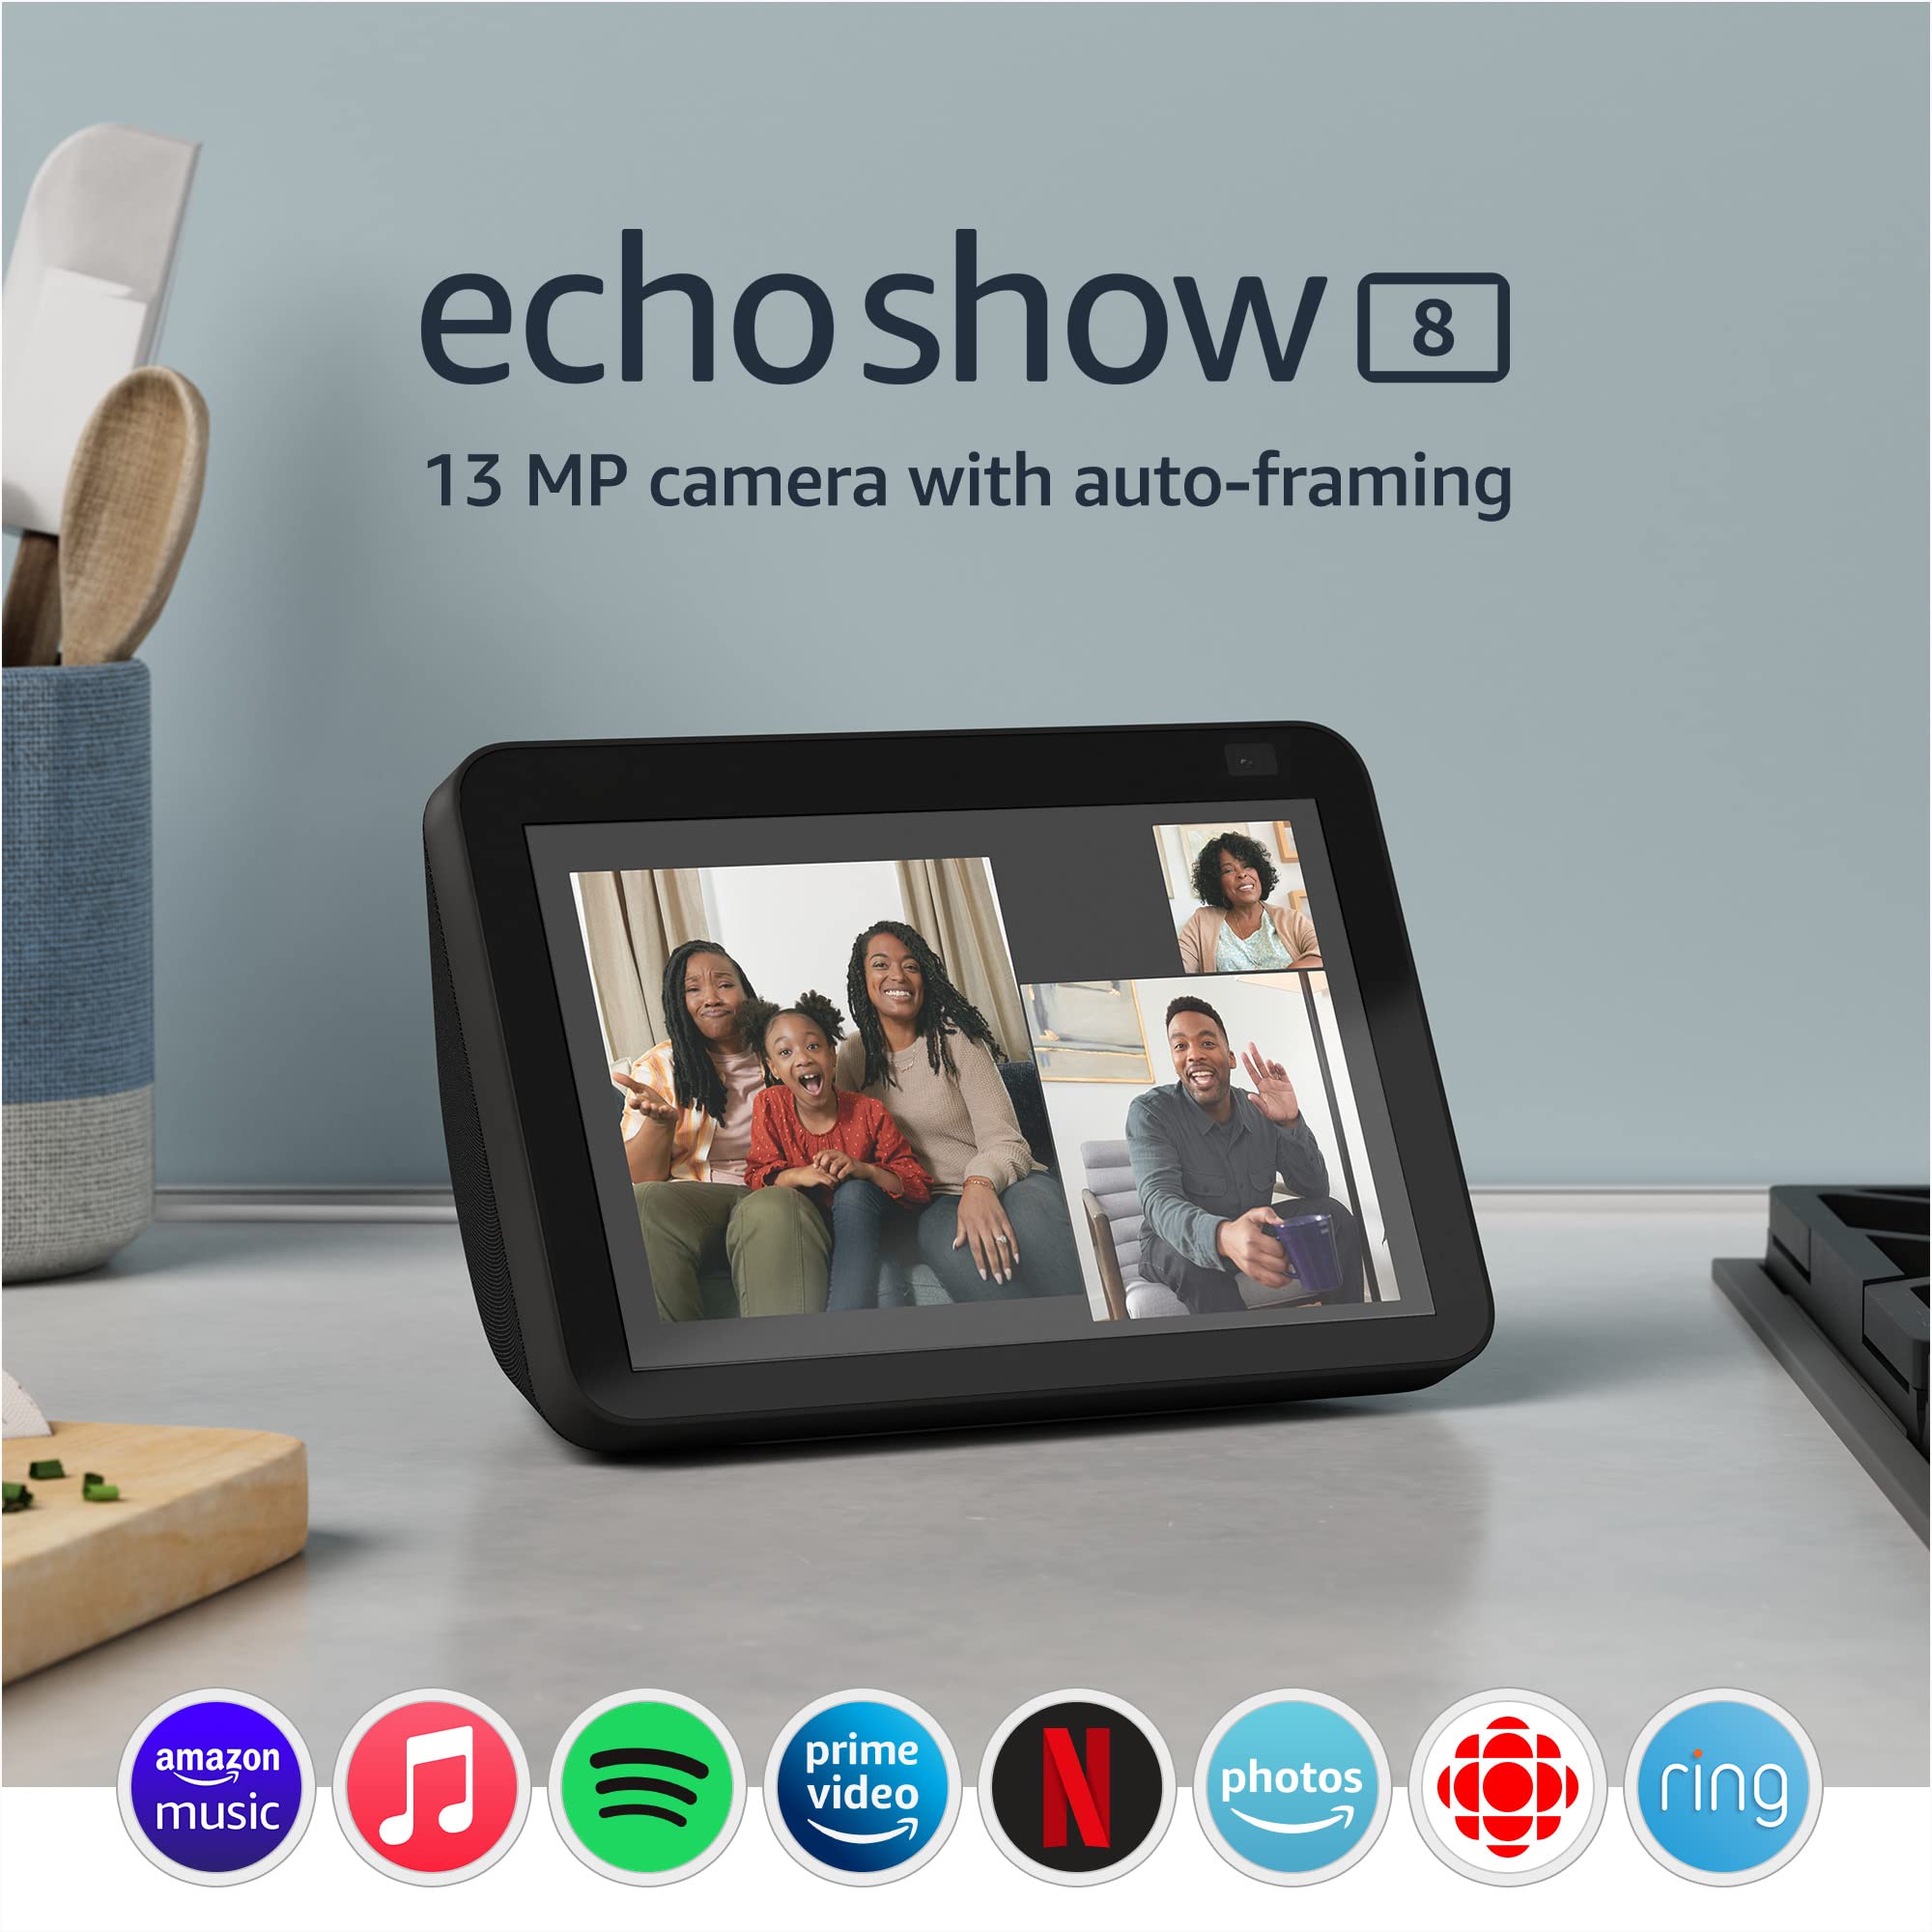 What You Should Know About Echo Show 8 Before You Buy